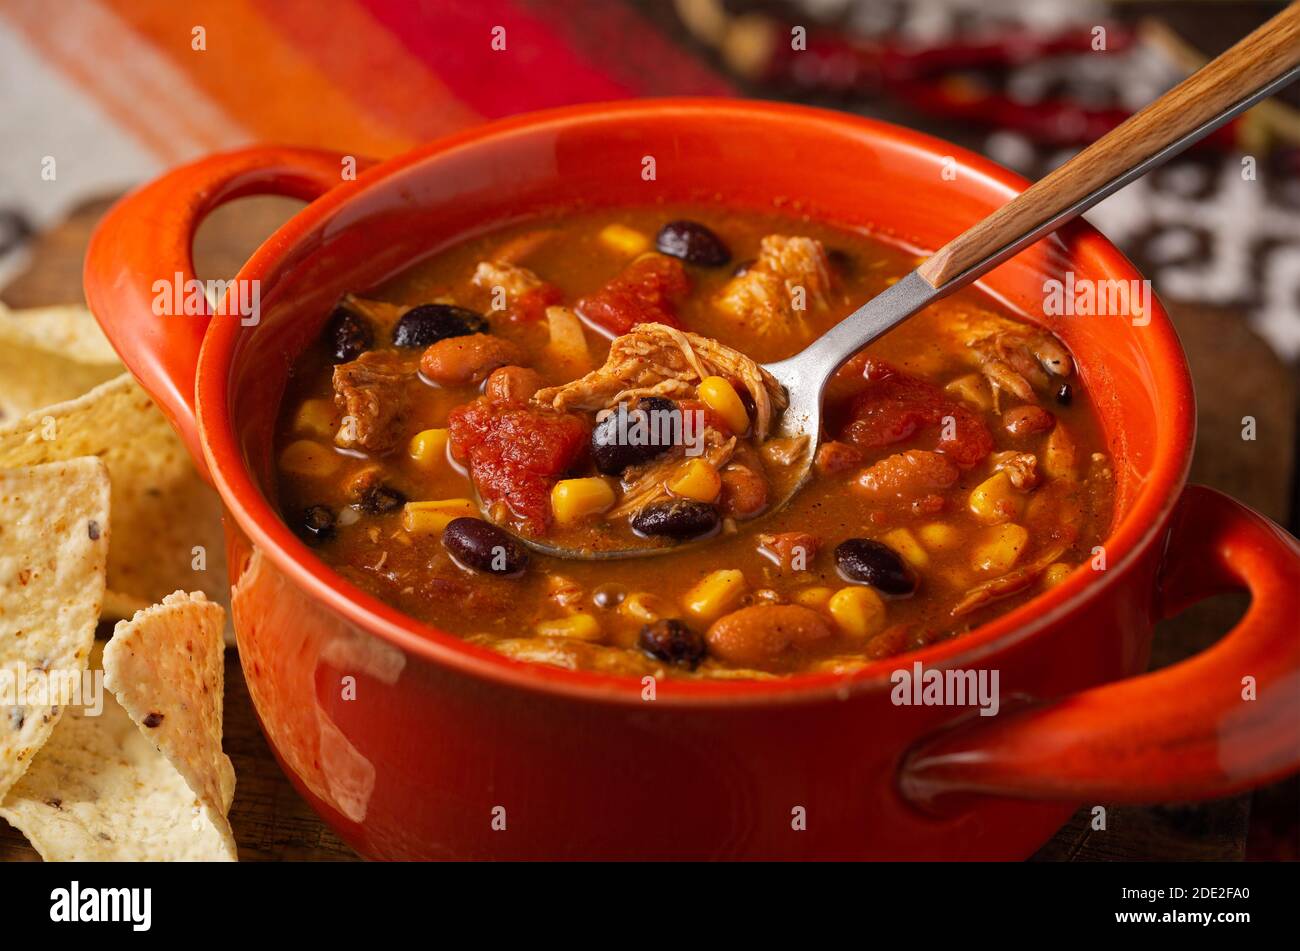 Wholesome taco chicken soup with warm tones served with tortilla chips Stock Photo